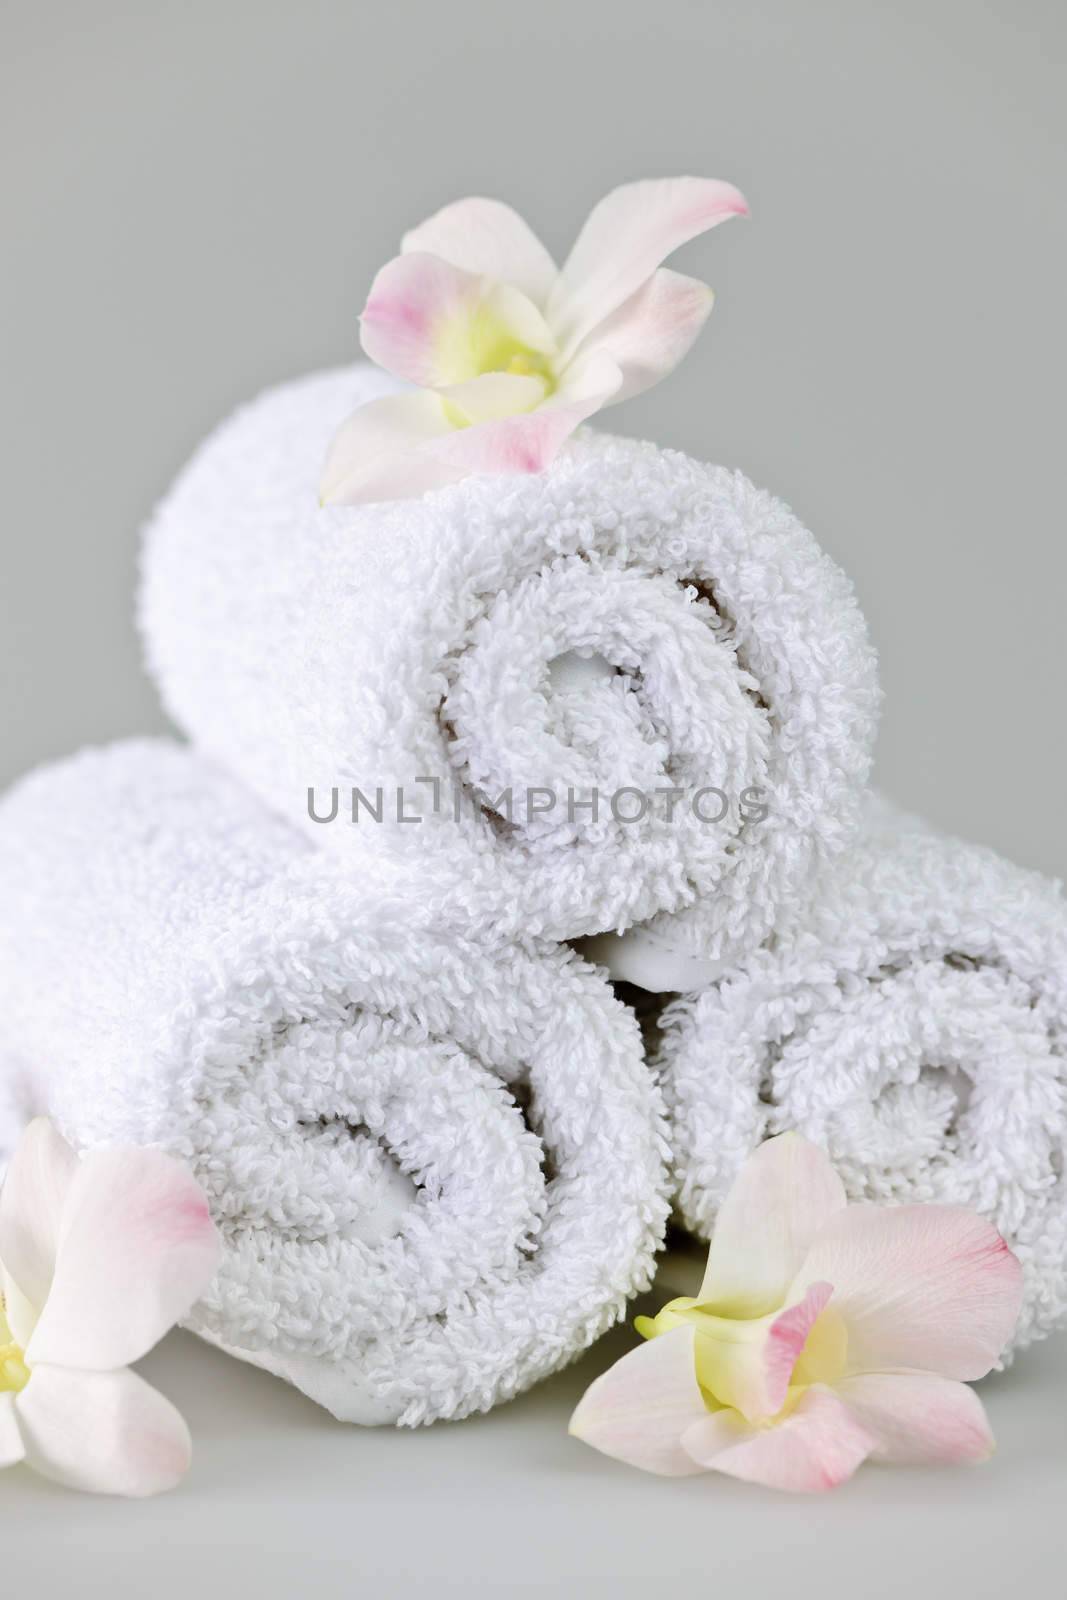 White rolled up spa towels by elenathewise